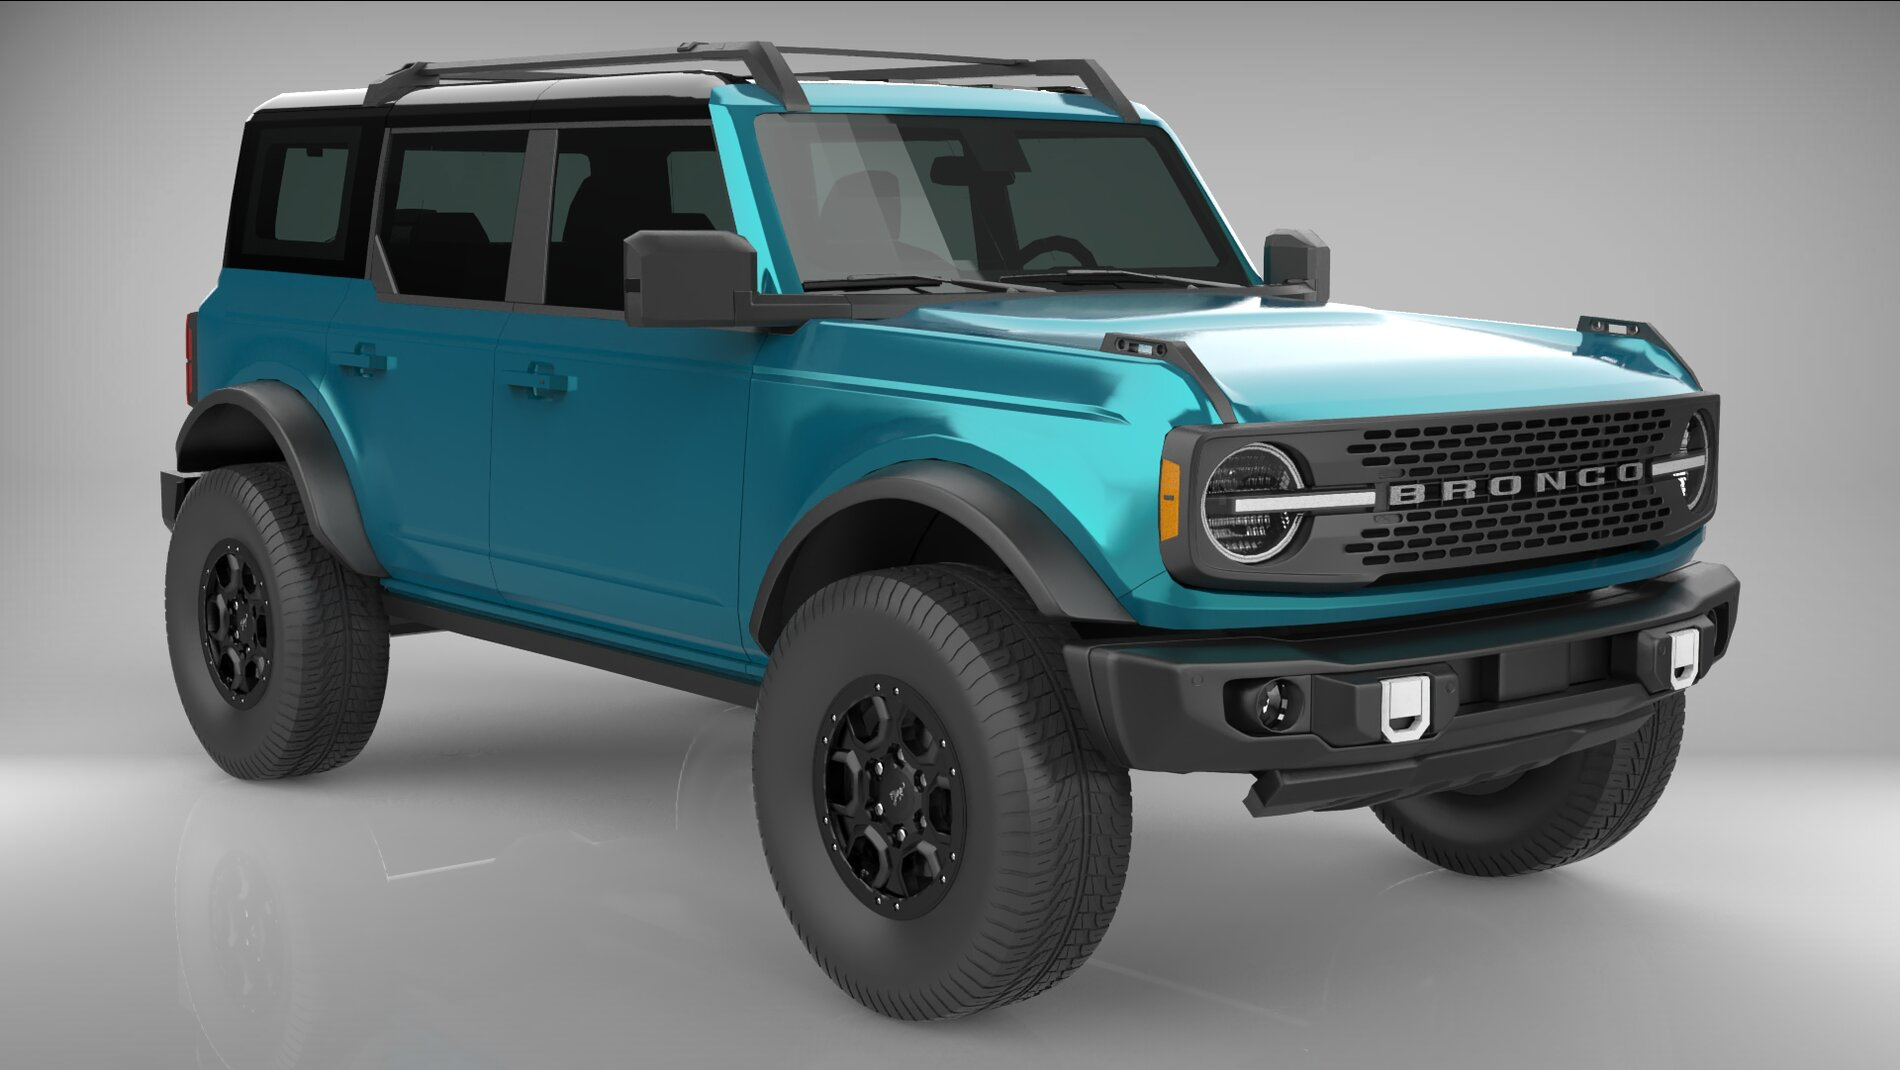 Ford Bronco Grabber Lime Green Possible Color??? 0F4FCAA8-2C79-4AEB-B3D1-490A6B1A4092